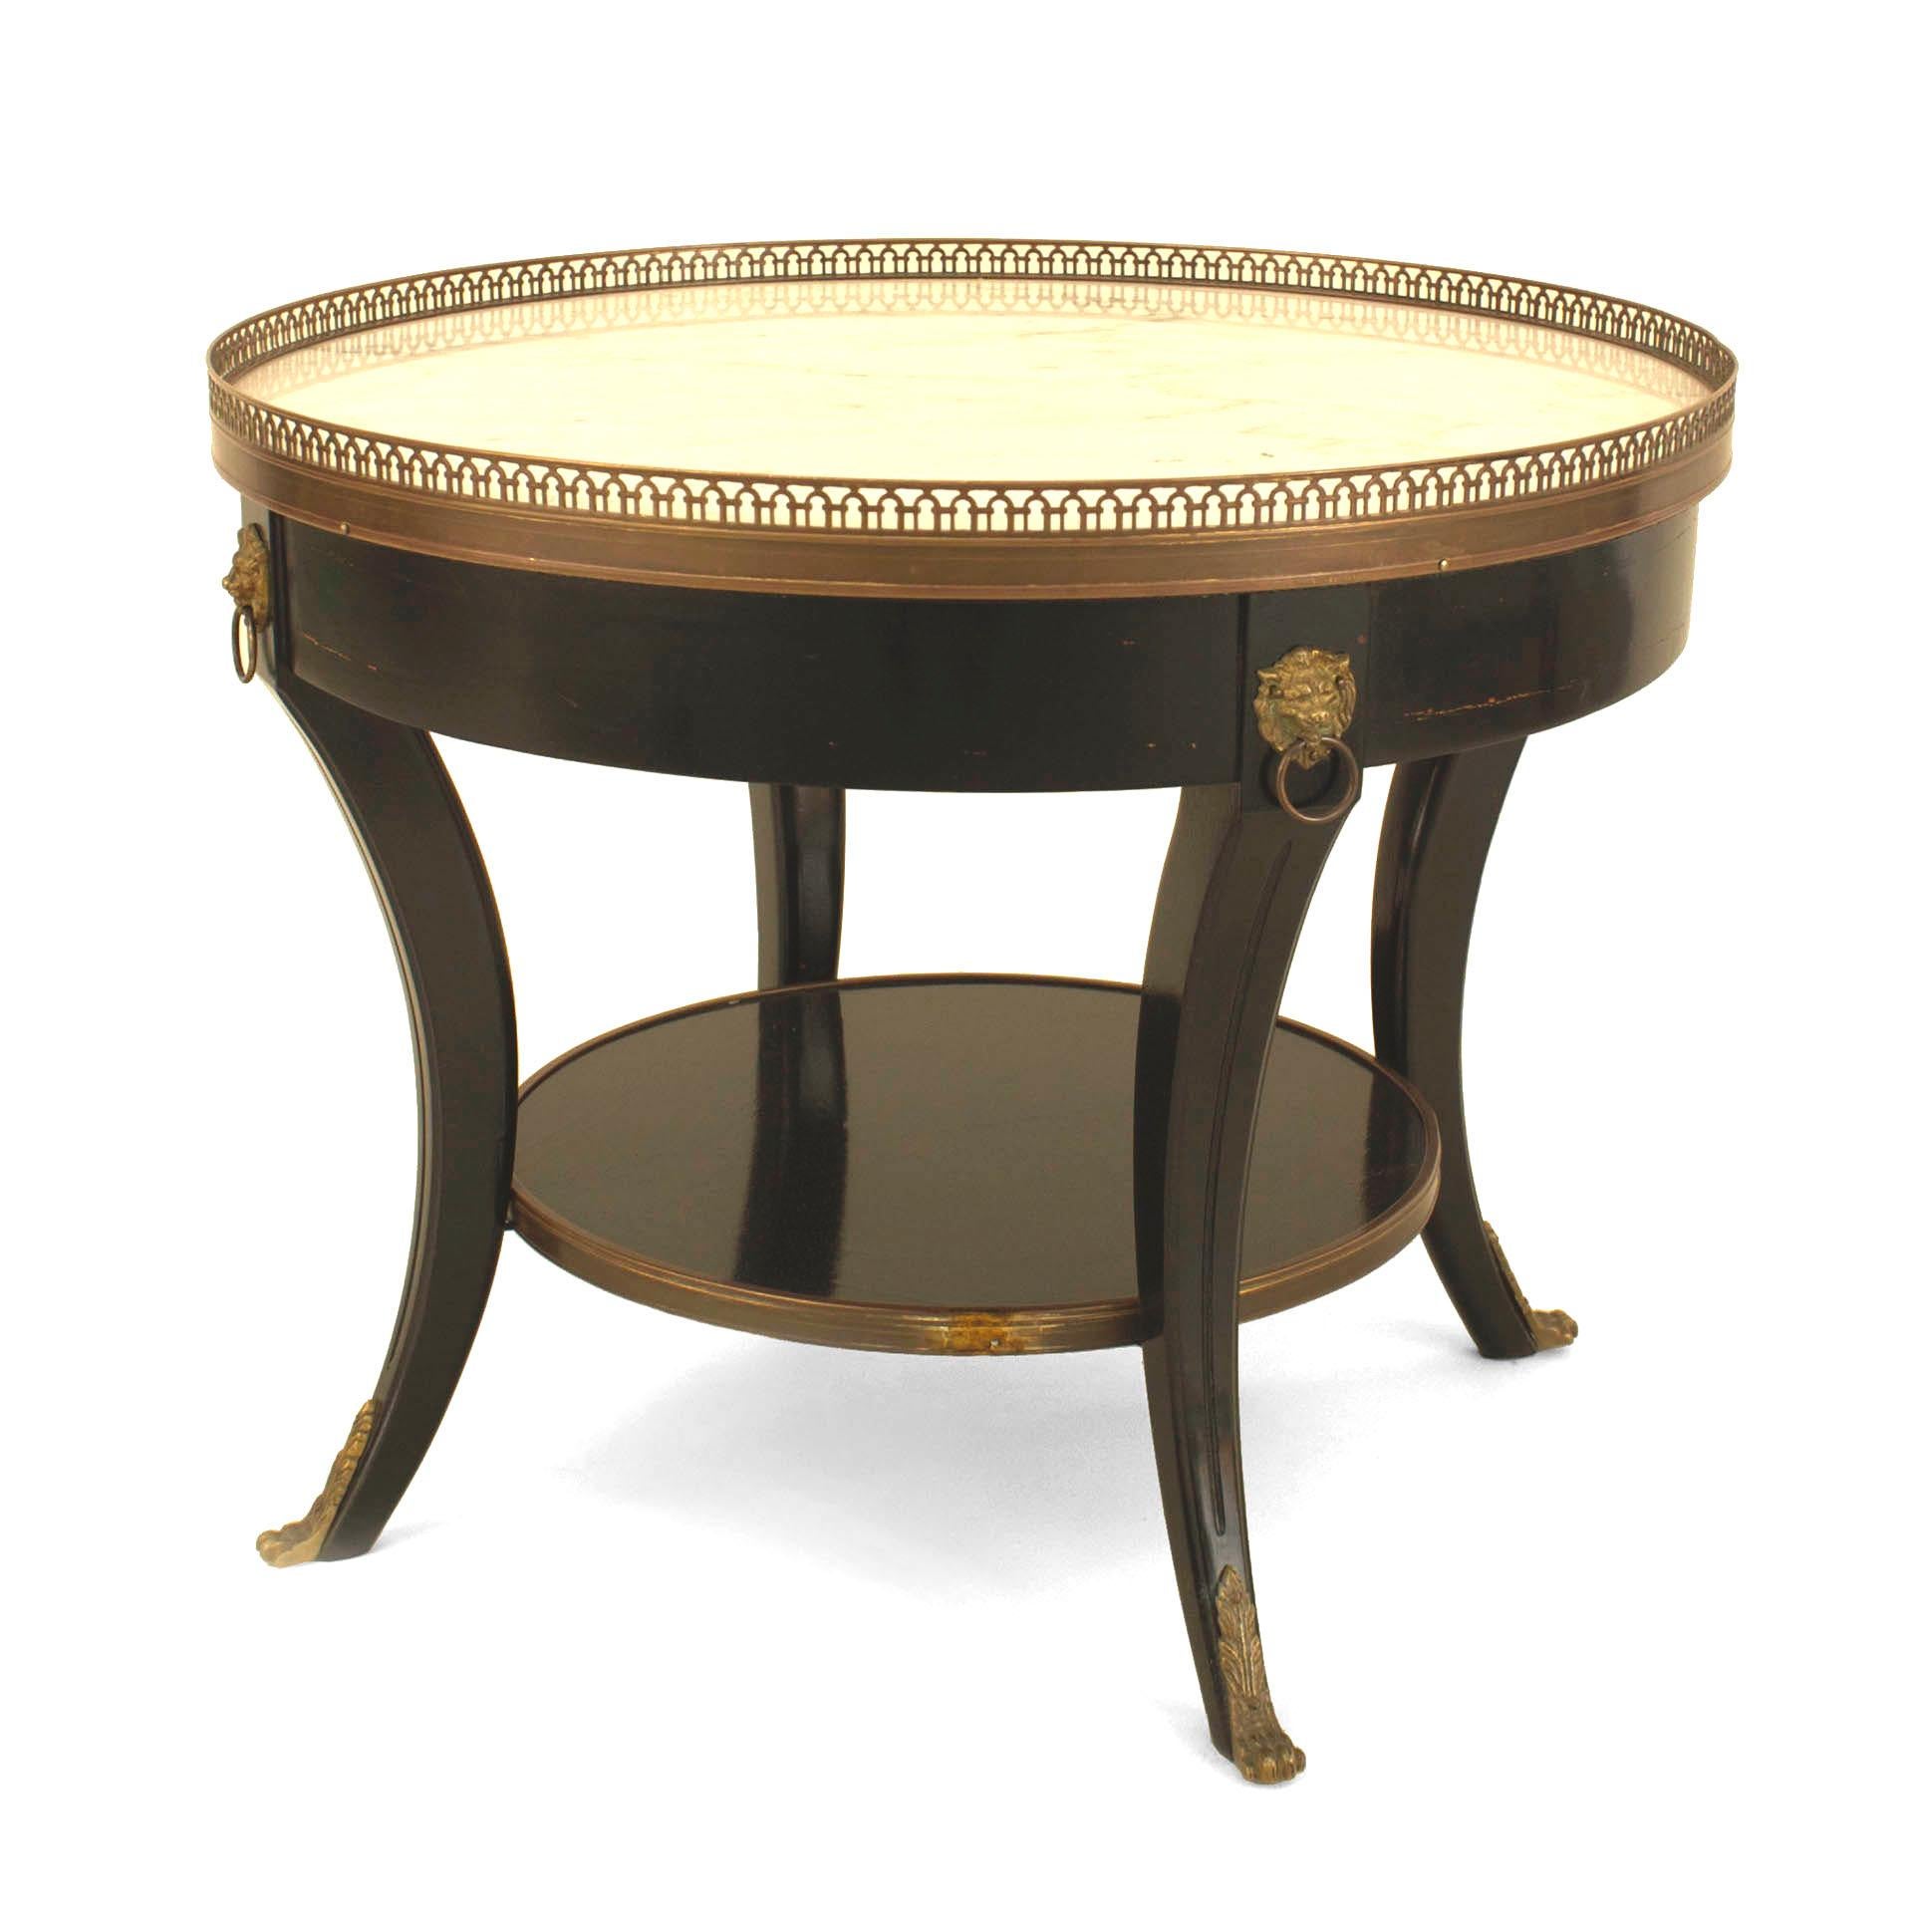 Pair of French Louis XVI-style (1940s) ebonized and bronze trimmed low round end tables with white marble tops having a filigree bronze gallery with a shelf stretcher. (Attributed to MAISON JANSEN) (PRICED AS Pair)
